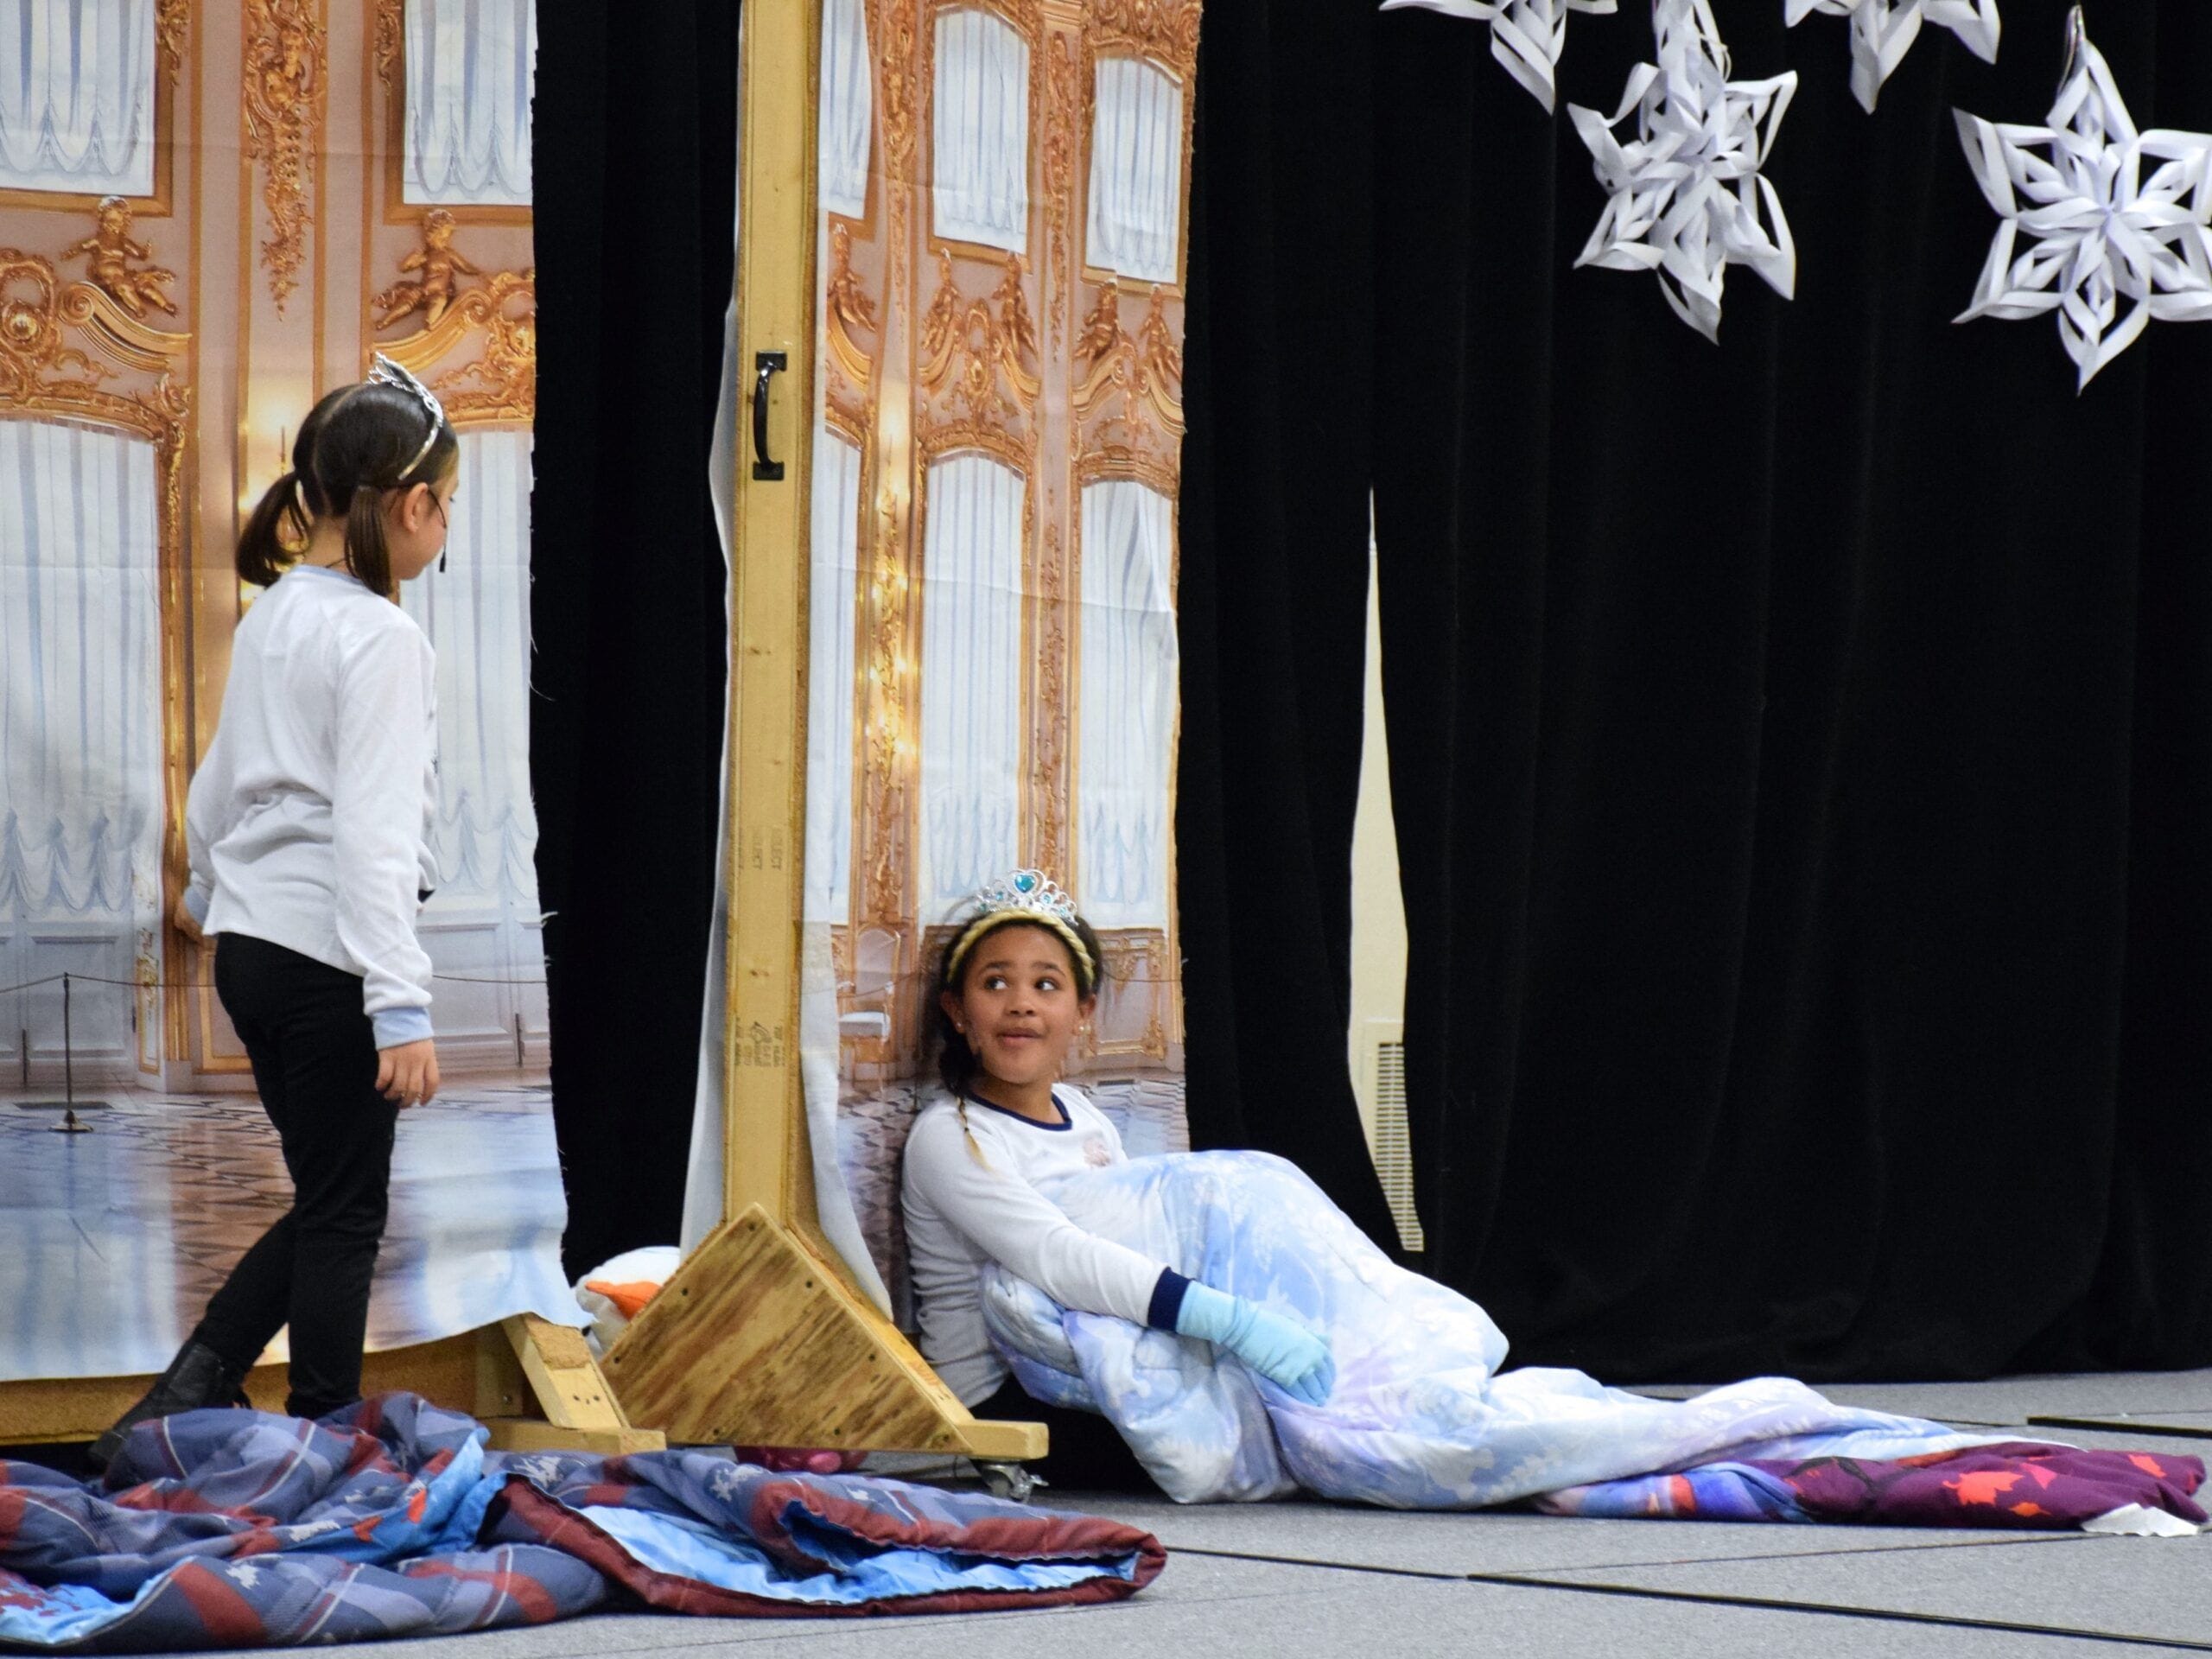 May Moore&#8217;s Magical &#8220;Frozen&#8221; Presented By Second-Grade Actors